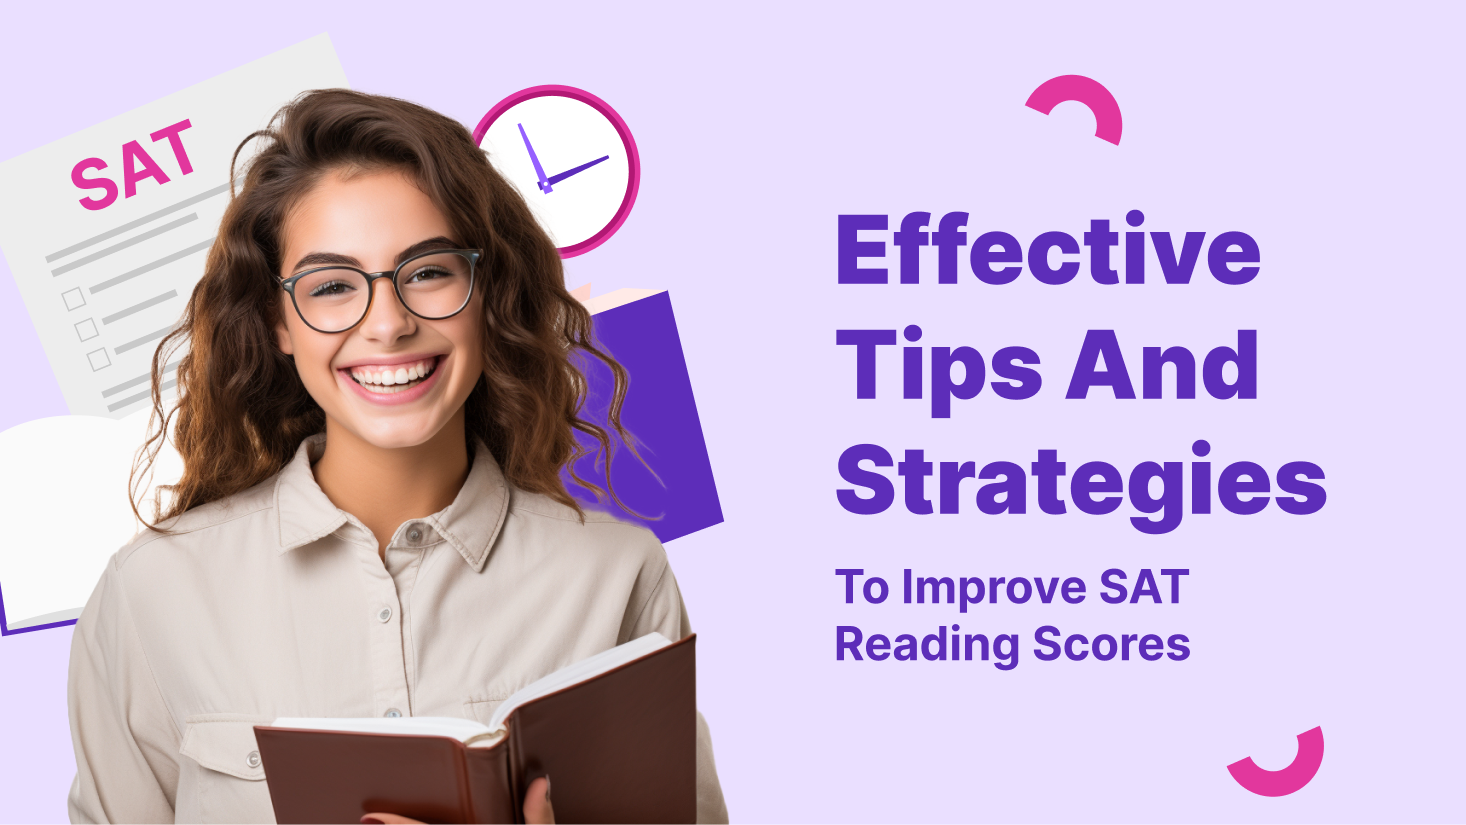 Effective Tips and Strategies to Improve SAT Reading Scores